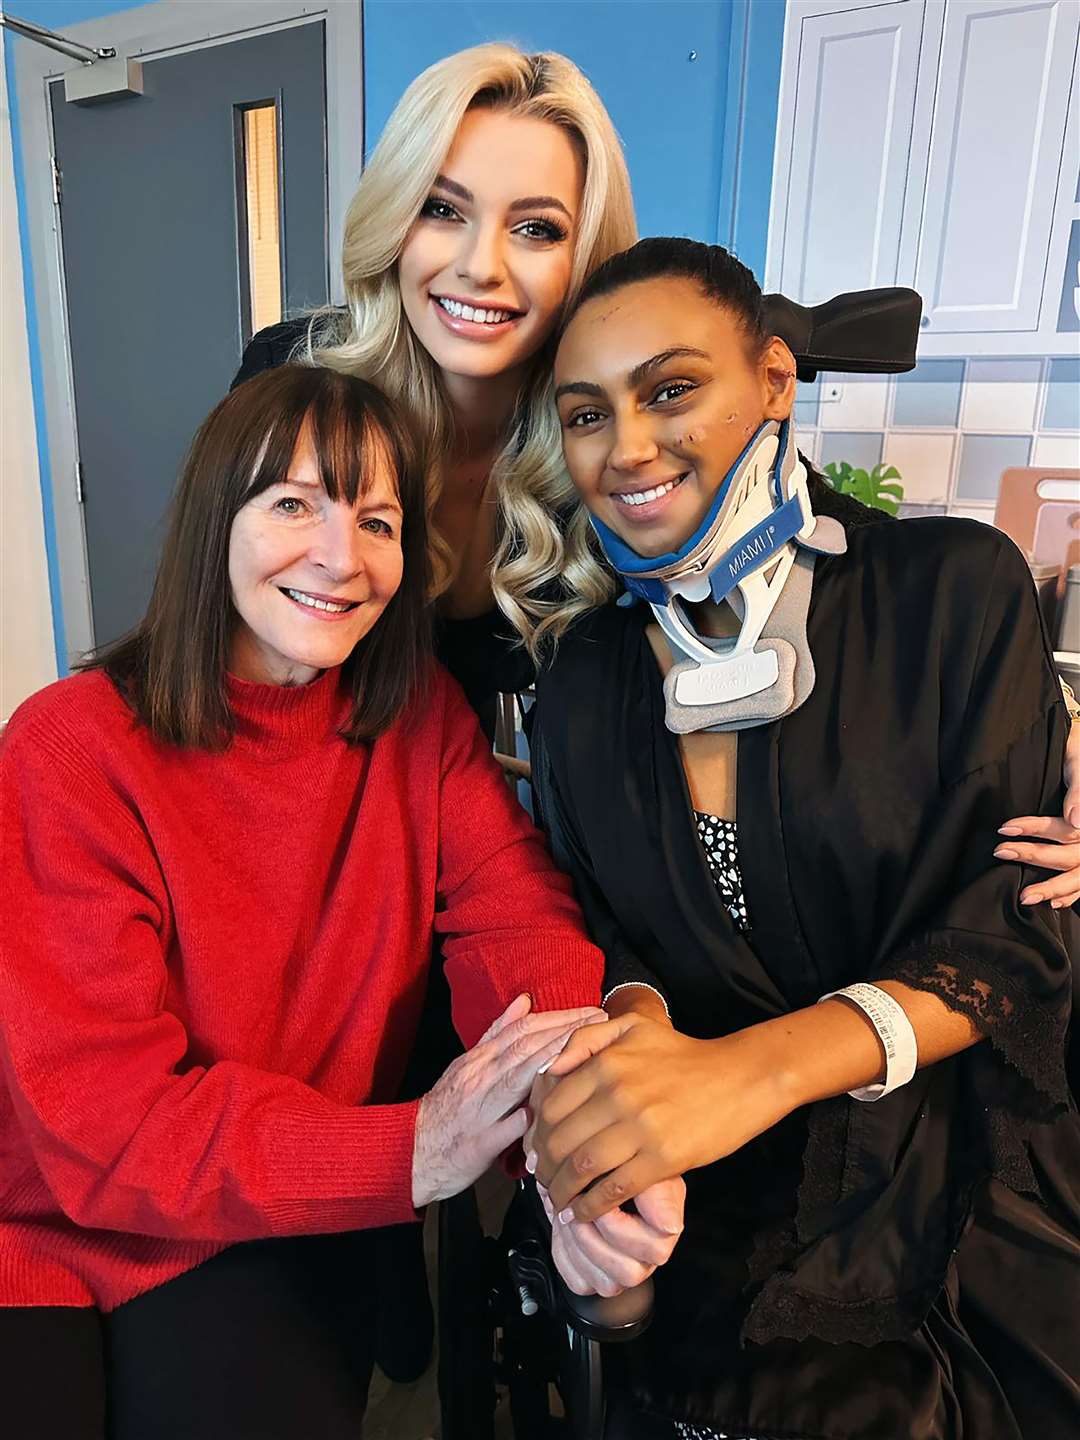 Reigning Miss World Karolina Bielawska (centre), and the chairwoman of the Miss World organisation, Julia Morley, visit Darcey Corria in hospital (Miss World Organisation/PA)